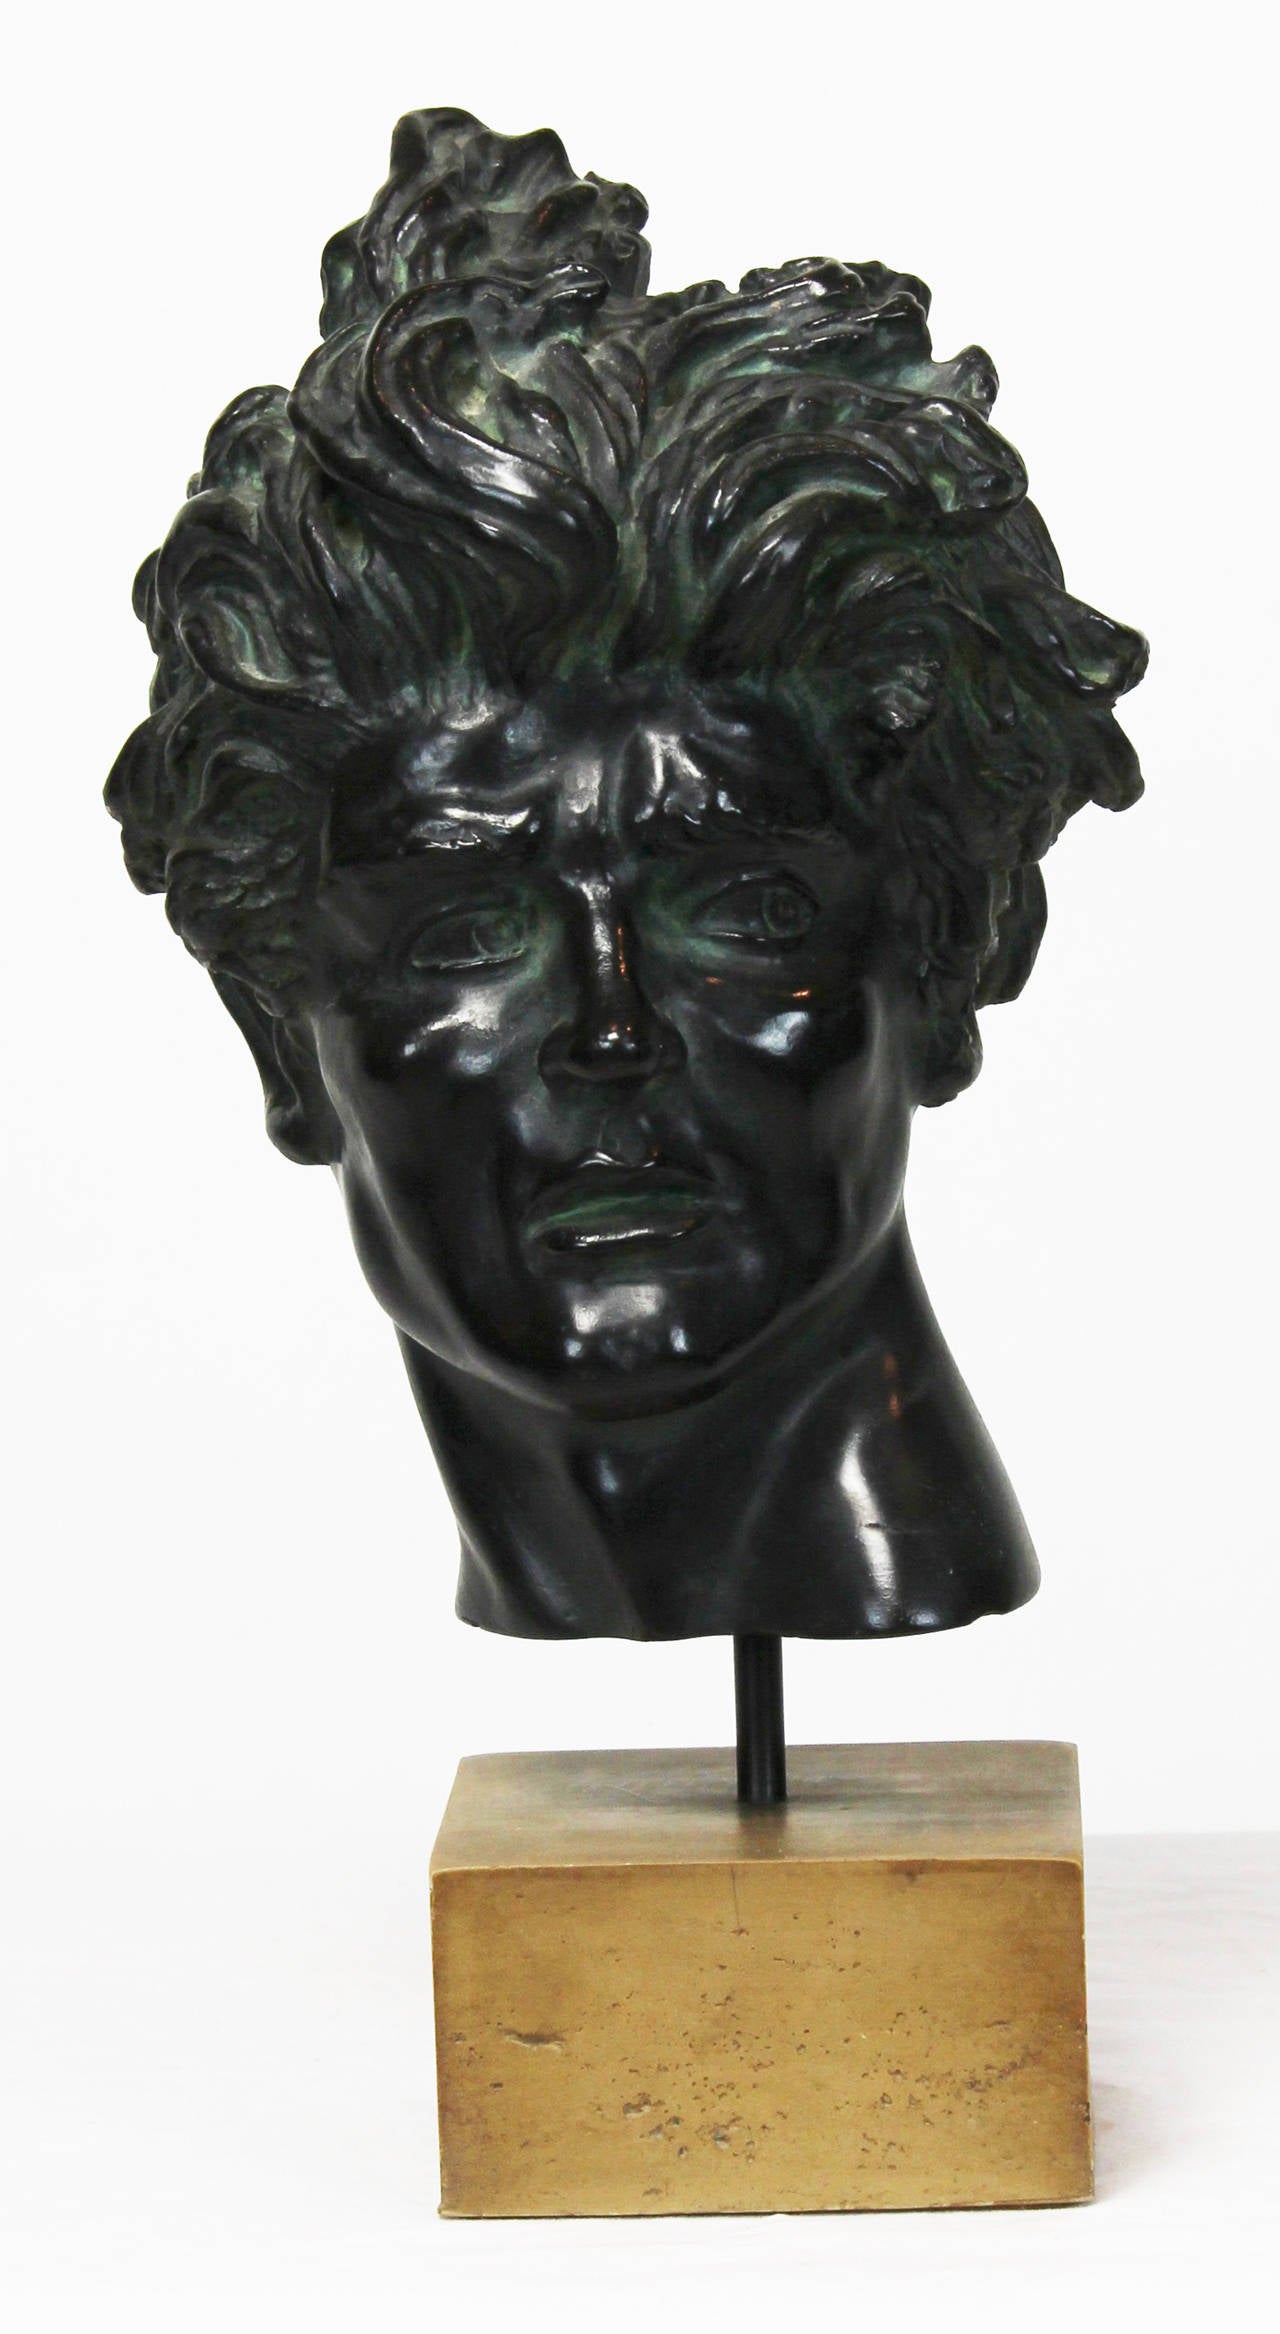 Classical sculpture of Heroic Head in bronzed resin on cube by Edward Melcarth signed and dated 1968